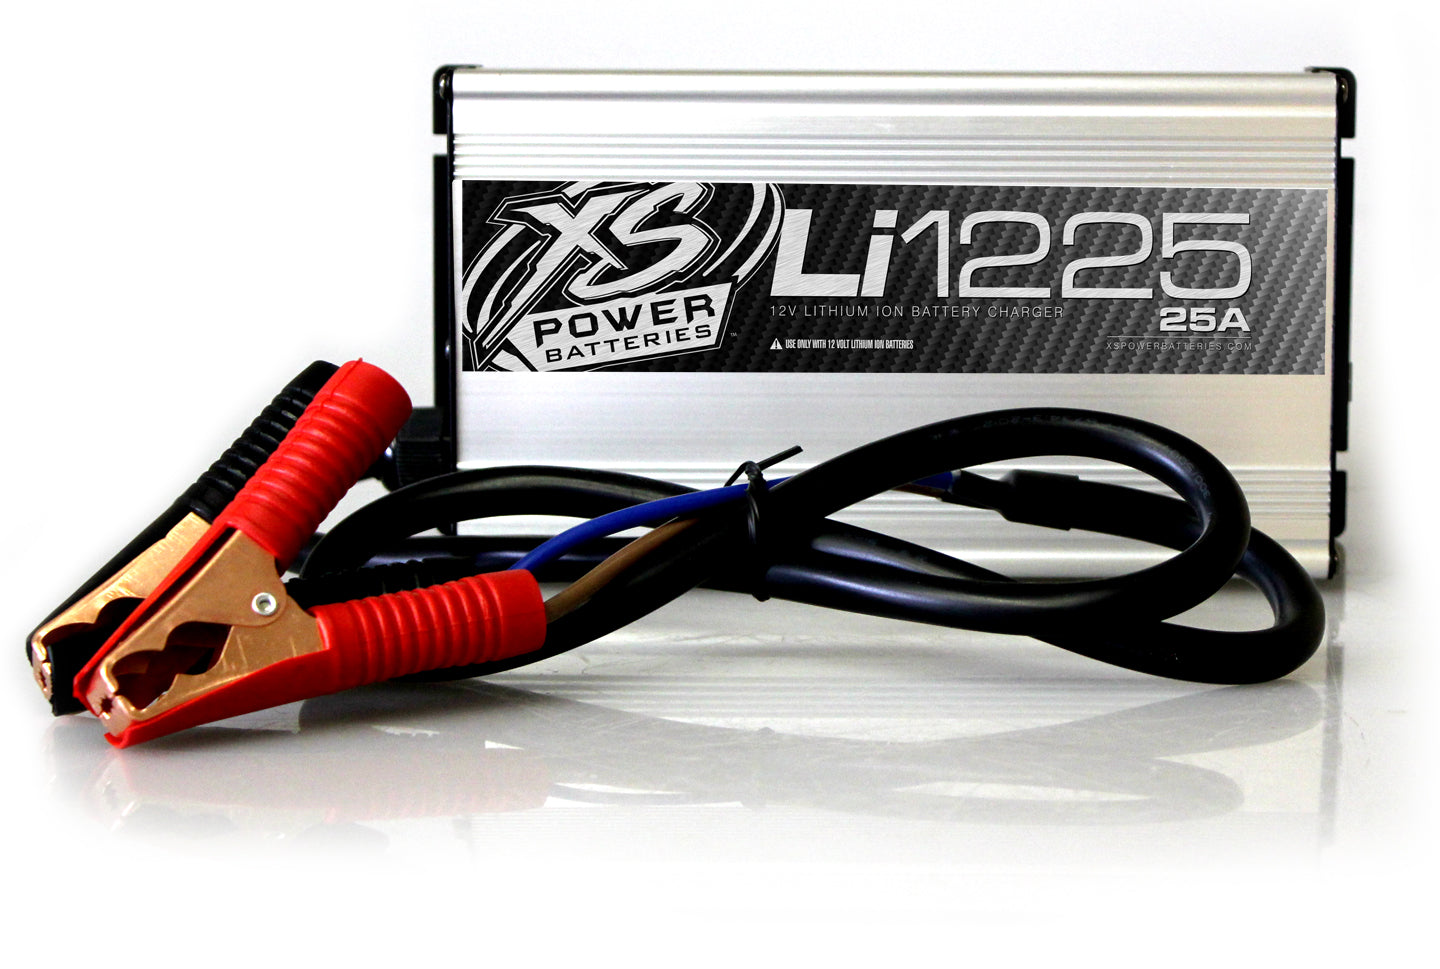 XS Power Li1225 12V Lithium Ion Vehicle Battery Charger 25A